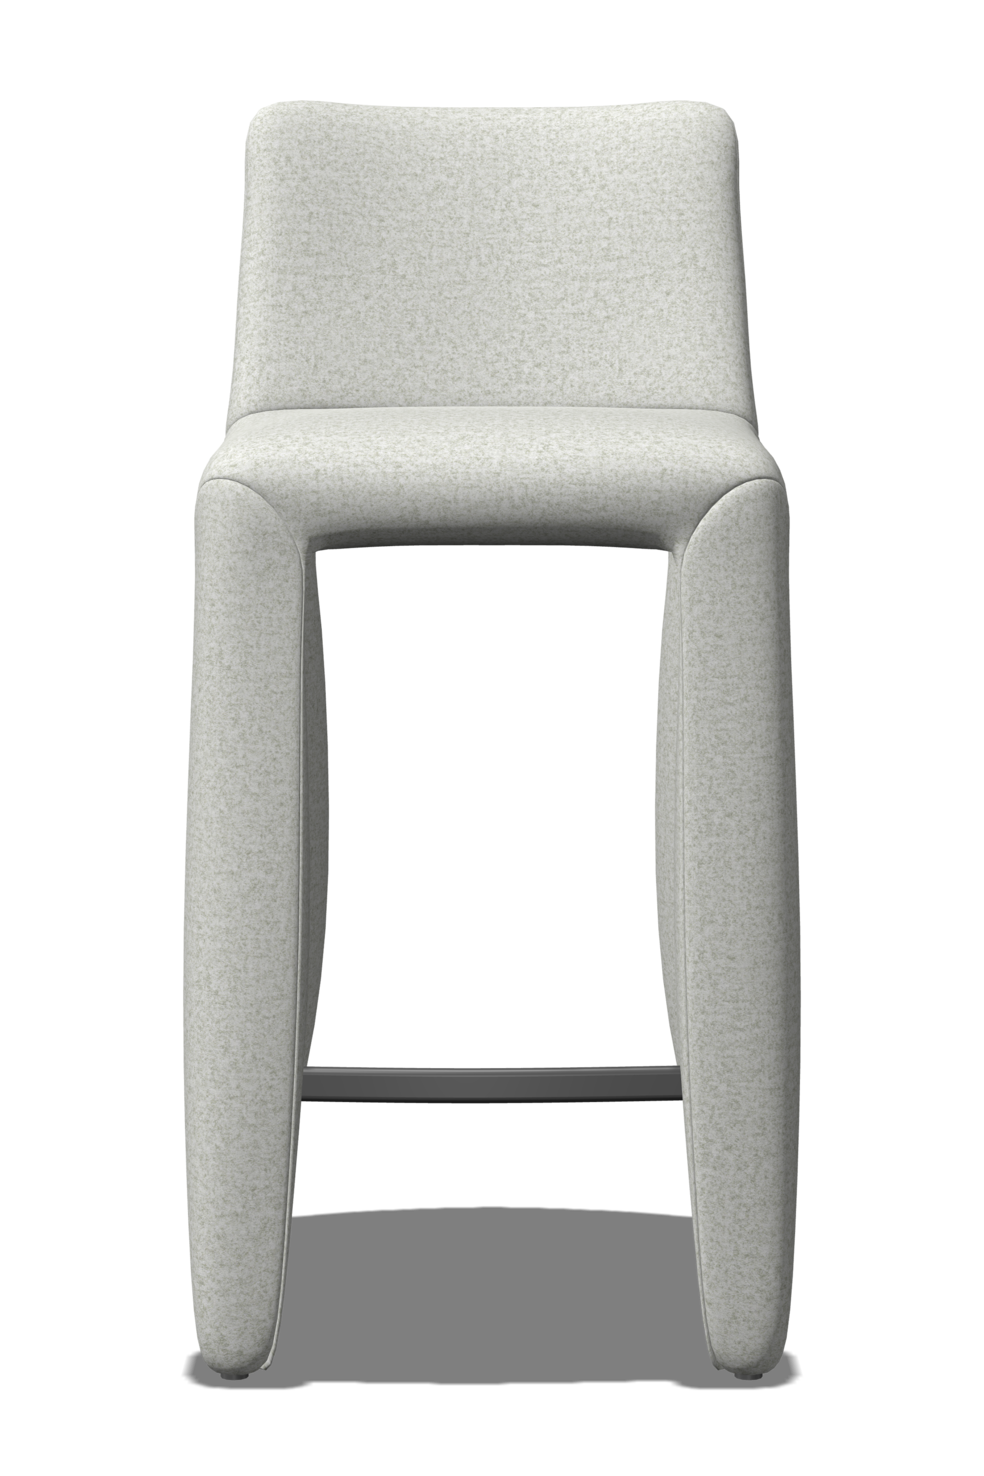 Monster Barstool low no stitching grey